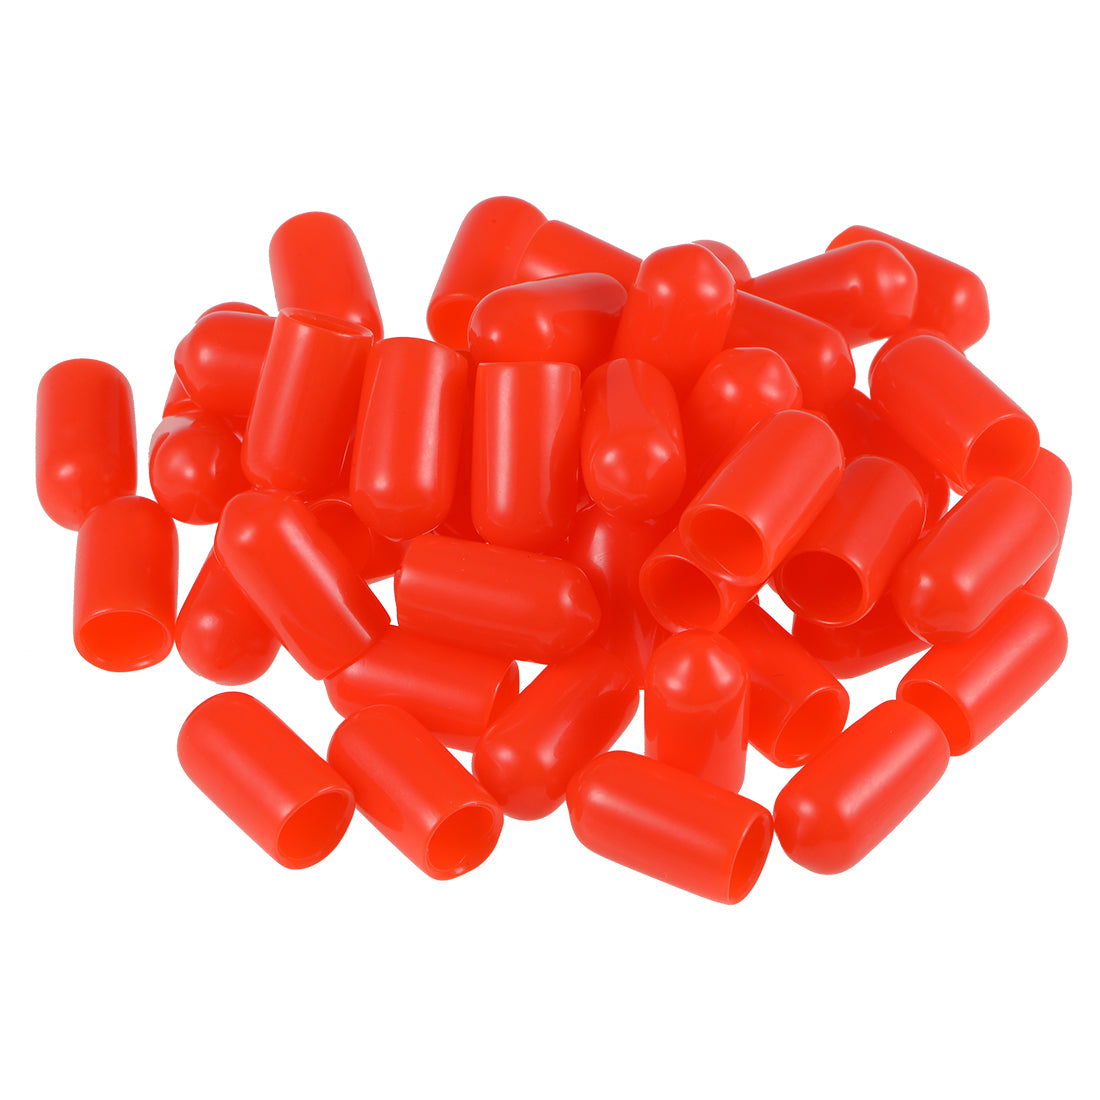 uxcell Uxcell 80pcs Rubber End Caps 6.5mm ID 15mm Height Screw Thread Protectors Red